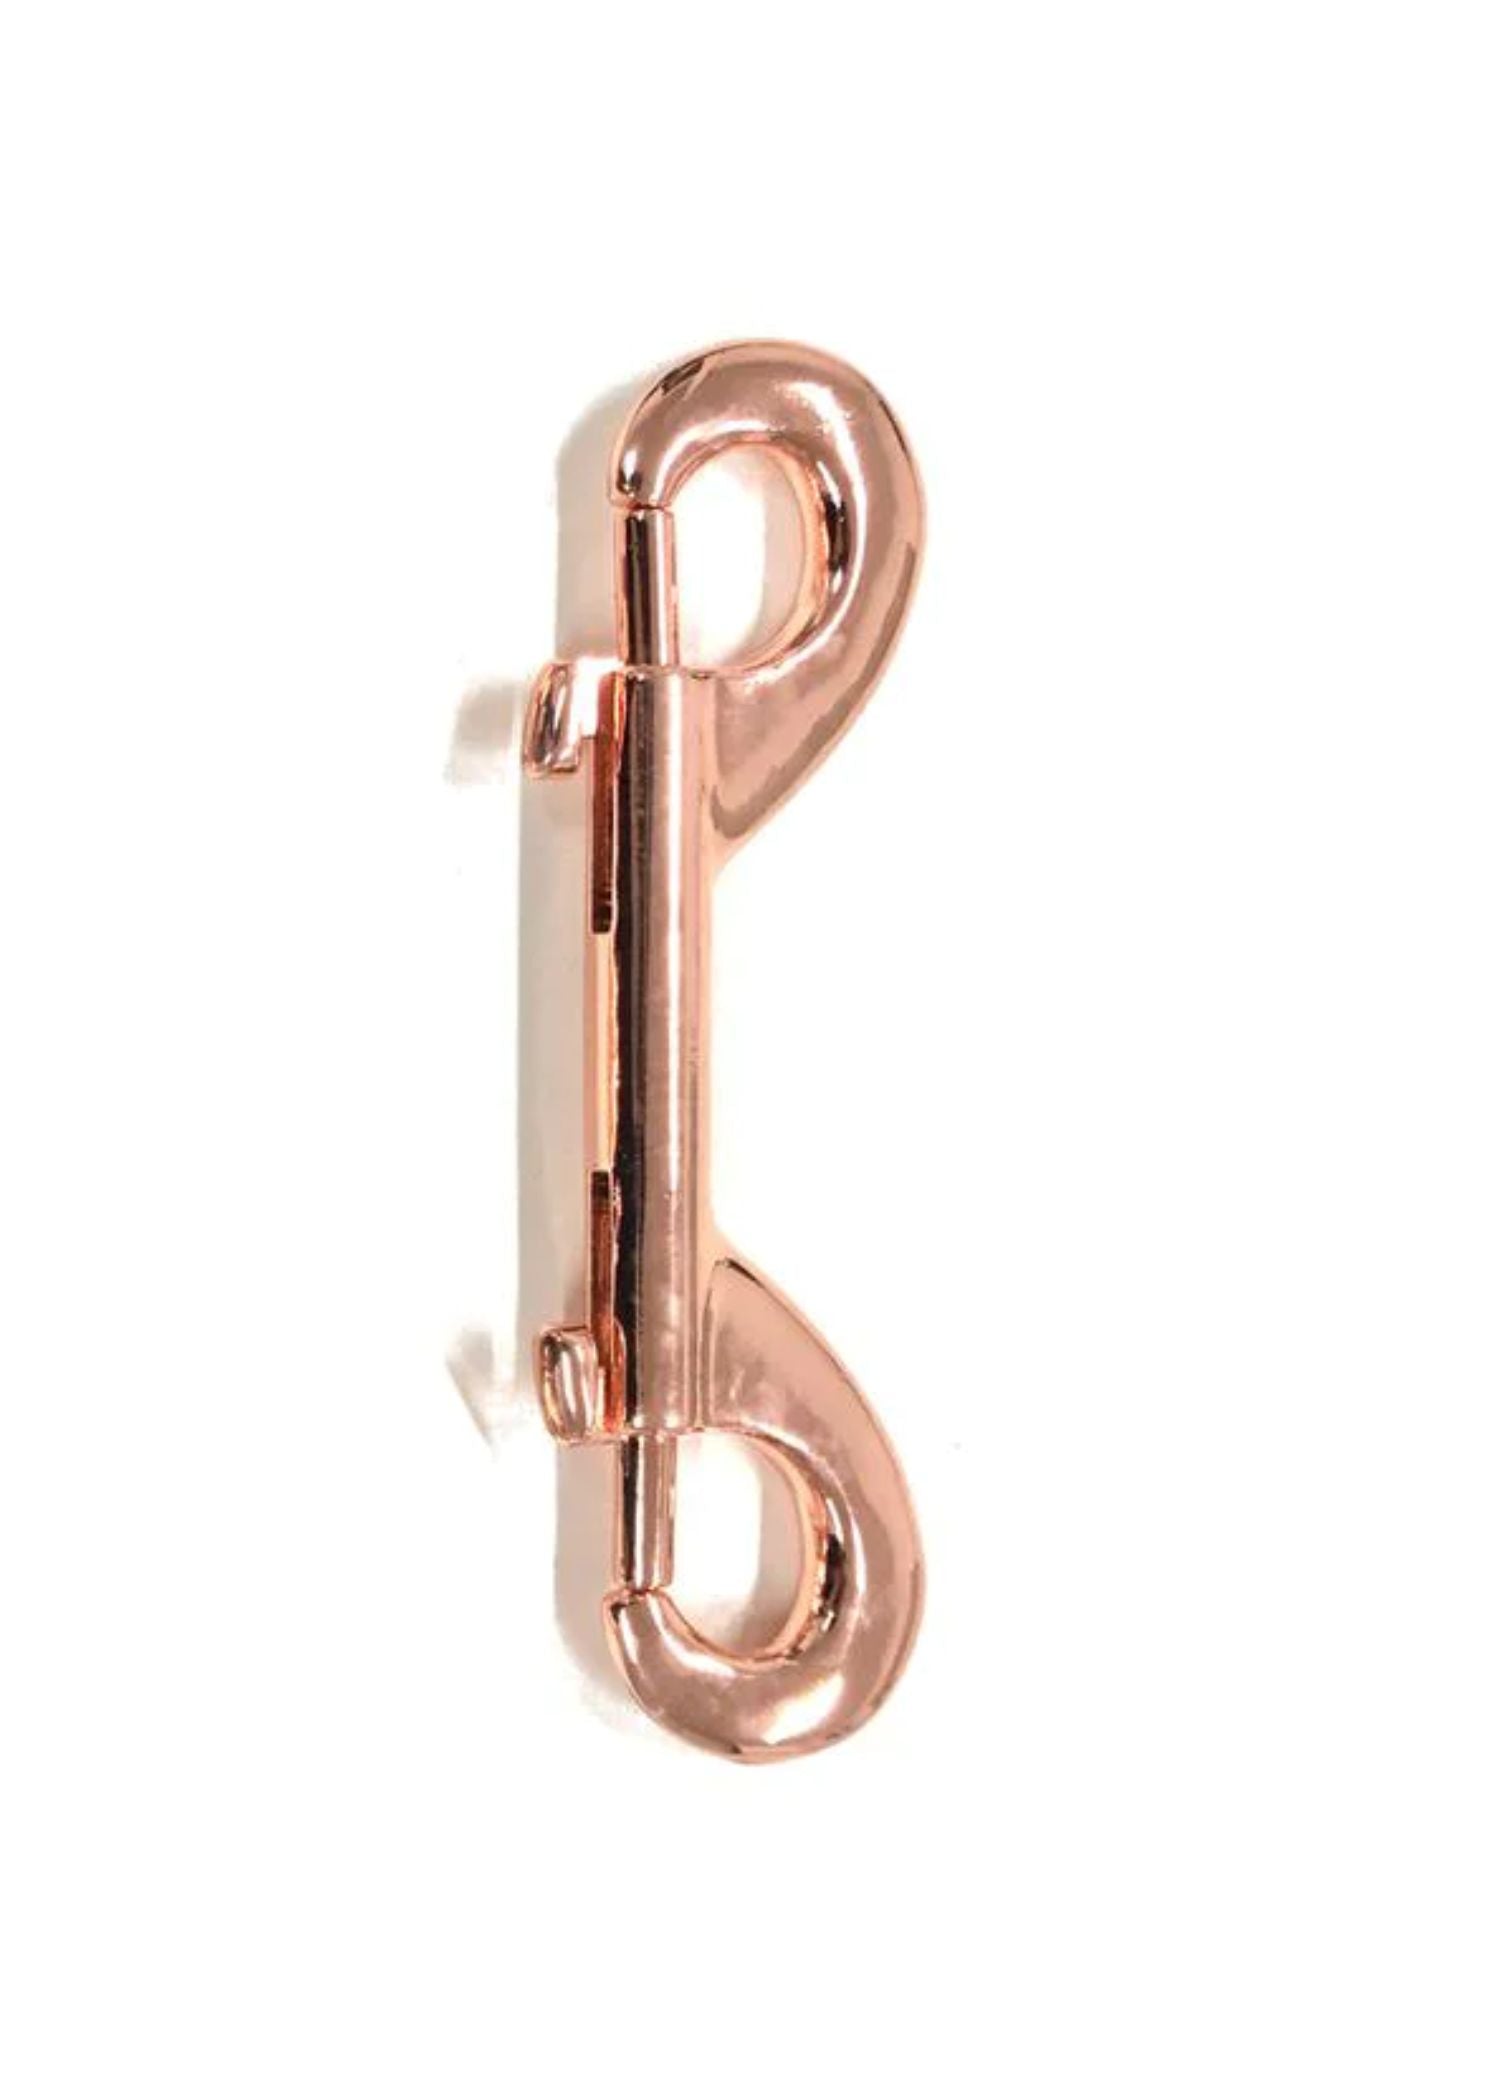 Liebe Seele Rose Gold Double End Clips - For Handcuffs / Ankle-Cuffs - BDSM Bondage Accessory | Avec Amour